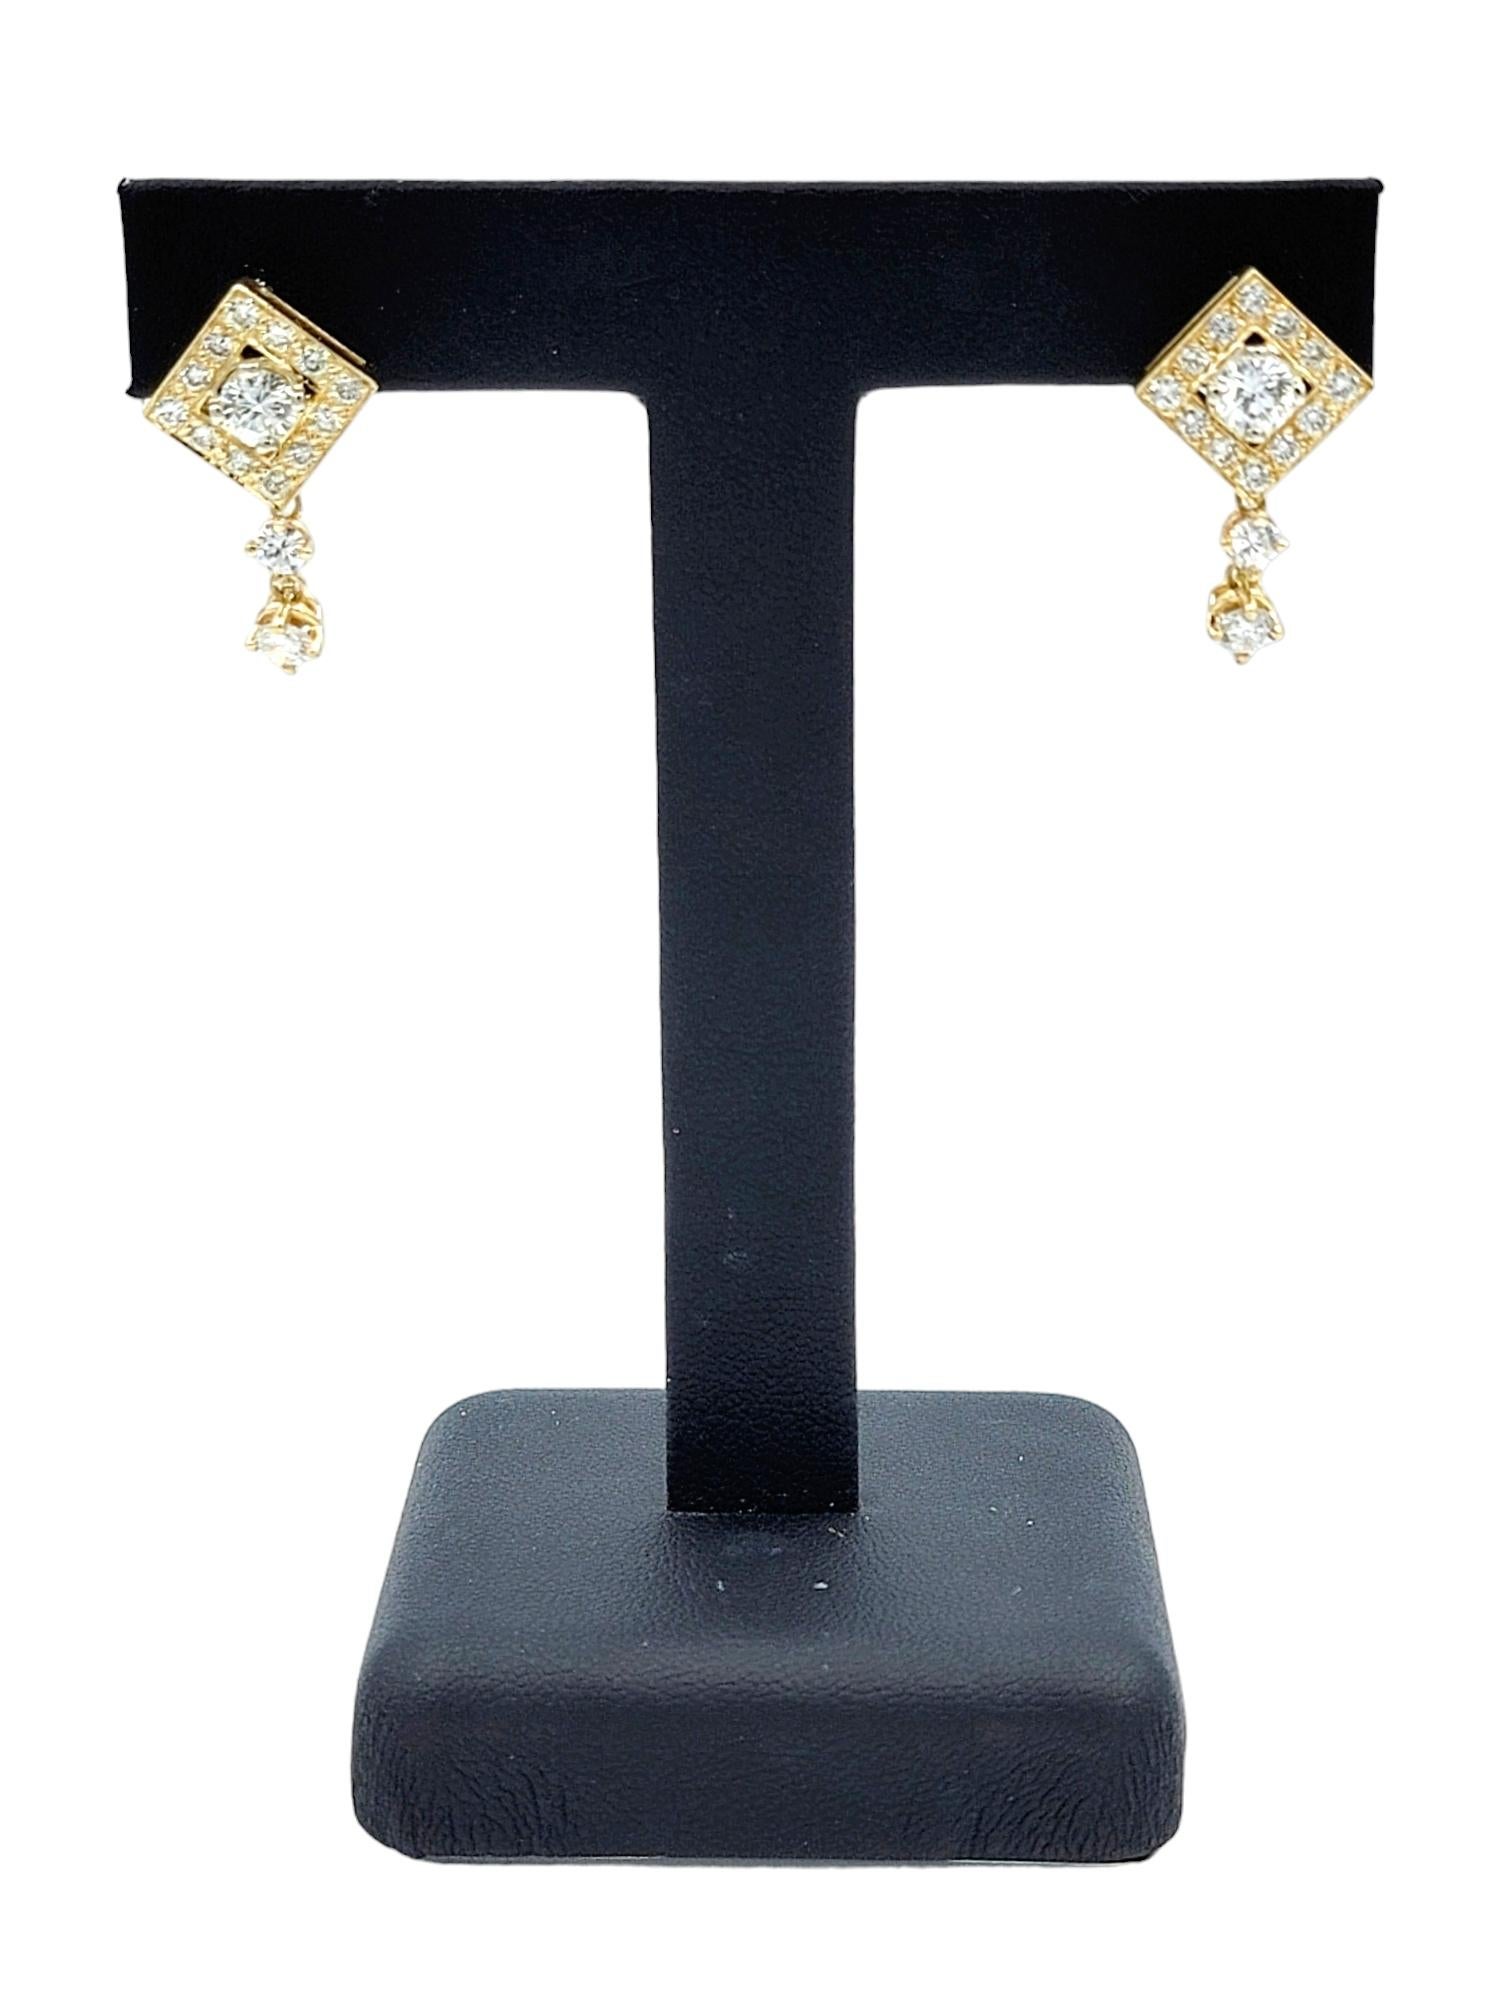 Squared 2.00 Carat Total Round Diamond Dangle Earrings in 14 Karat Yellow Gold  For Sale 1